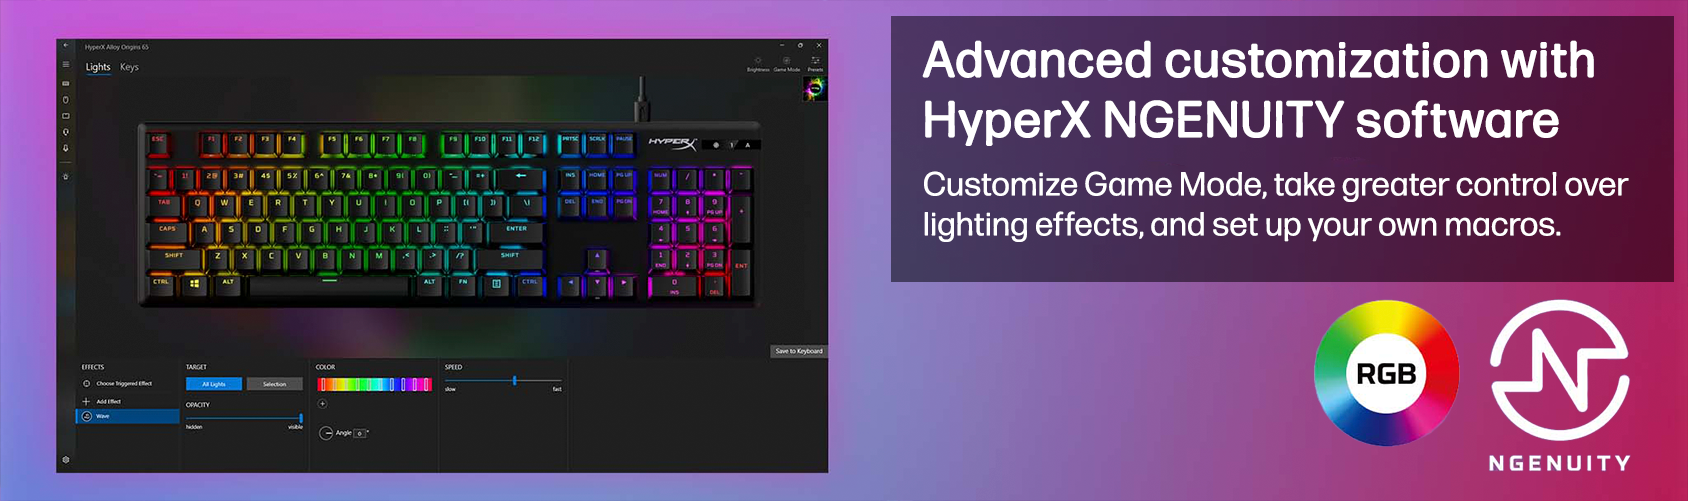 Advanced customization with HyperX NGENUITY software